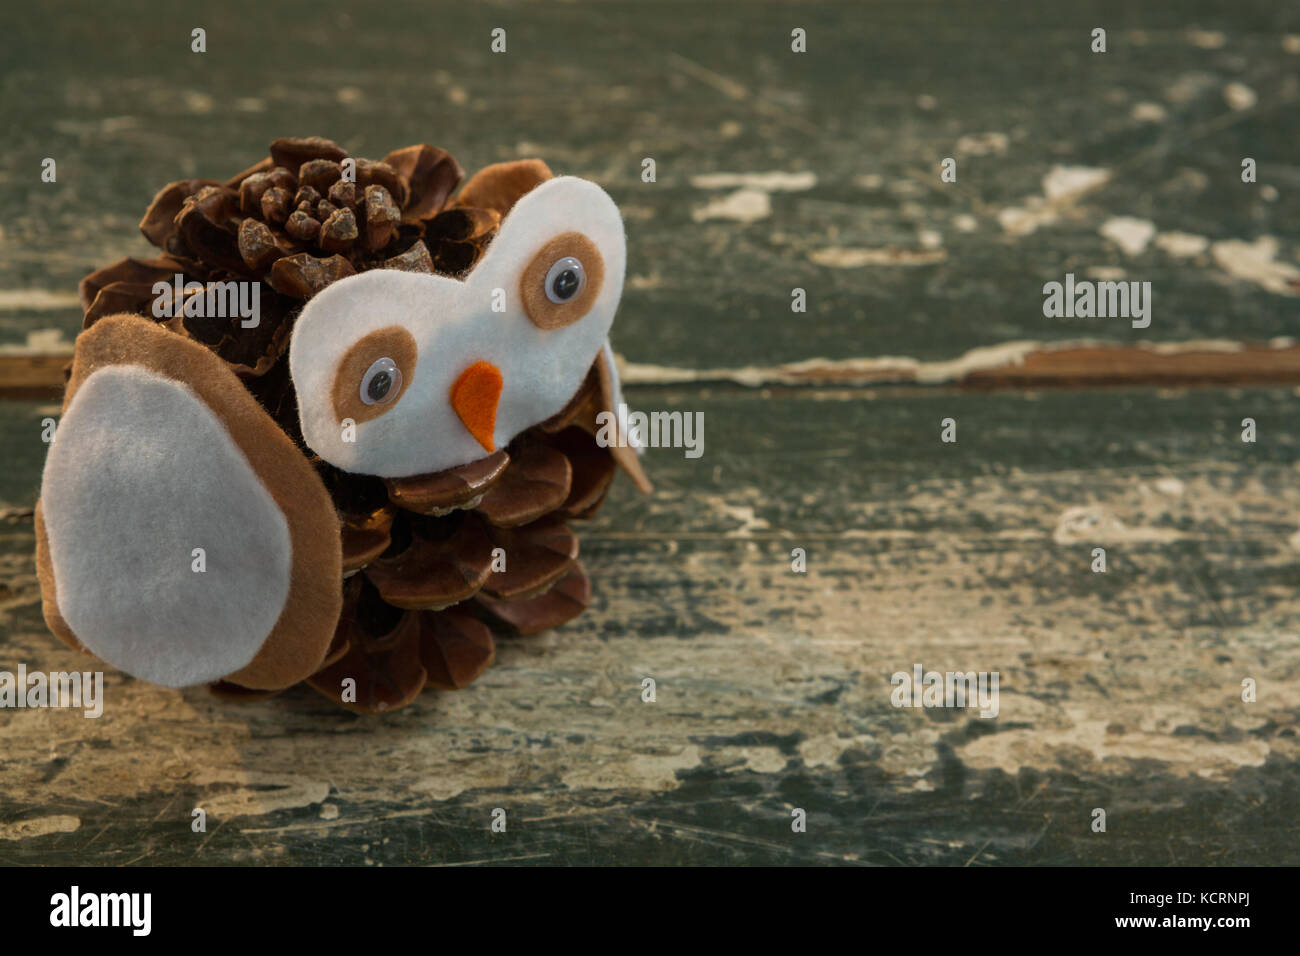 Close up of owl decoration made with pine cone on wooden table Stock Photo